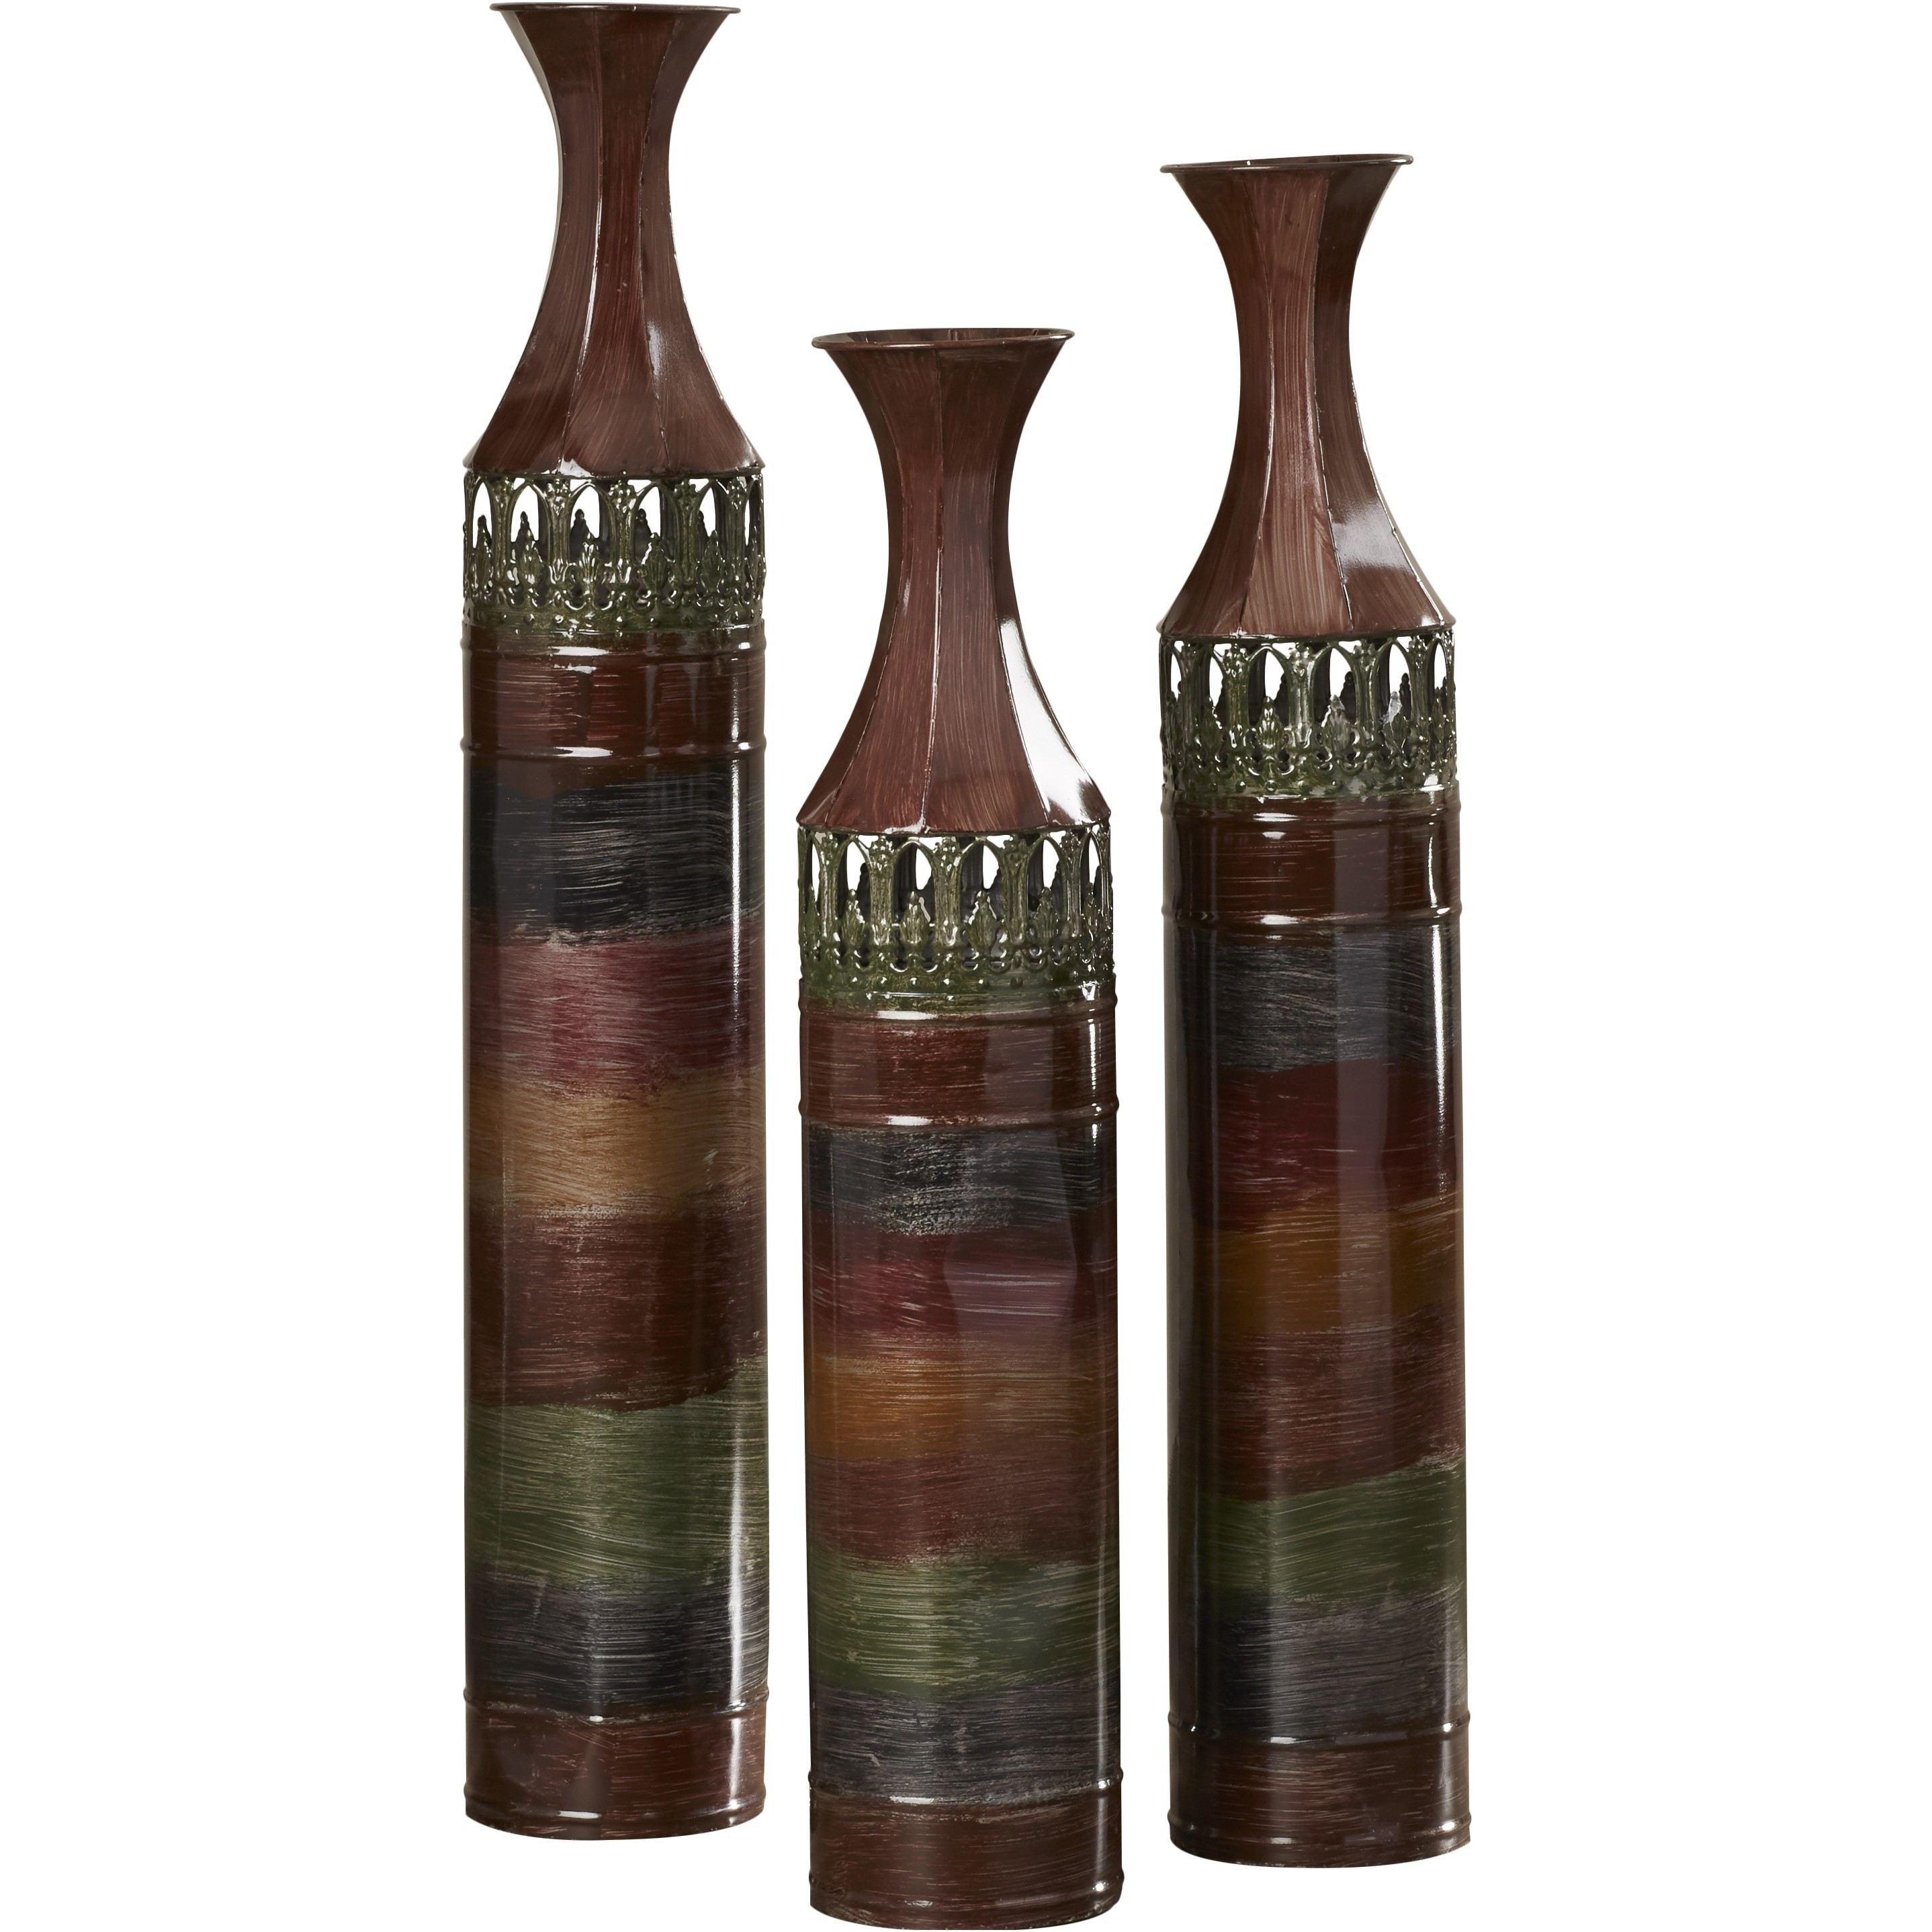 16 Unique Set Of 3 Tall Floor Vases 2024 free download set of 3 tall floor vases of awesome glass floor vases home design tall decorative floor vases for awesome glass floor vases home design tall decorative floor vases lovely vases floor vase